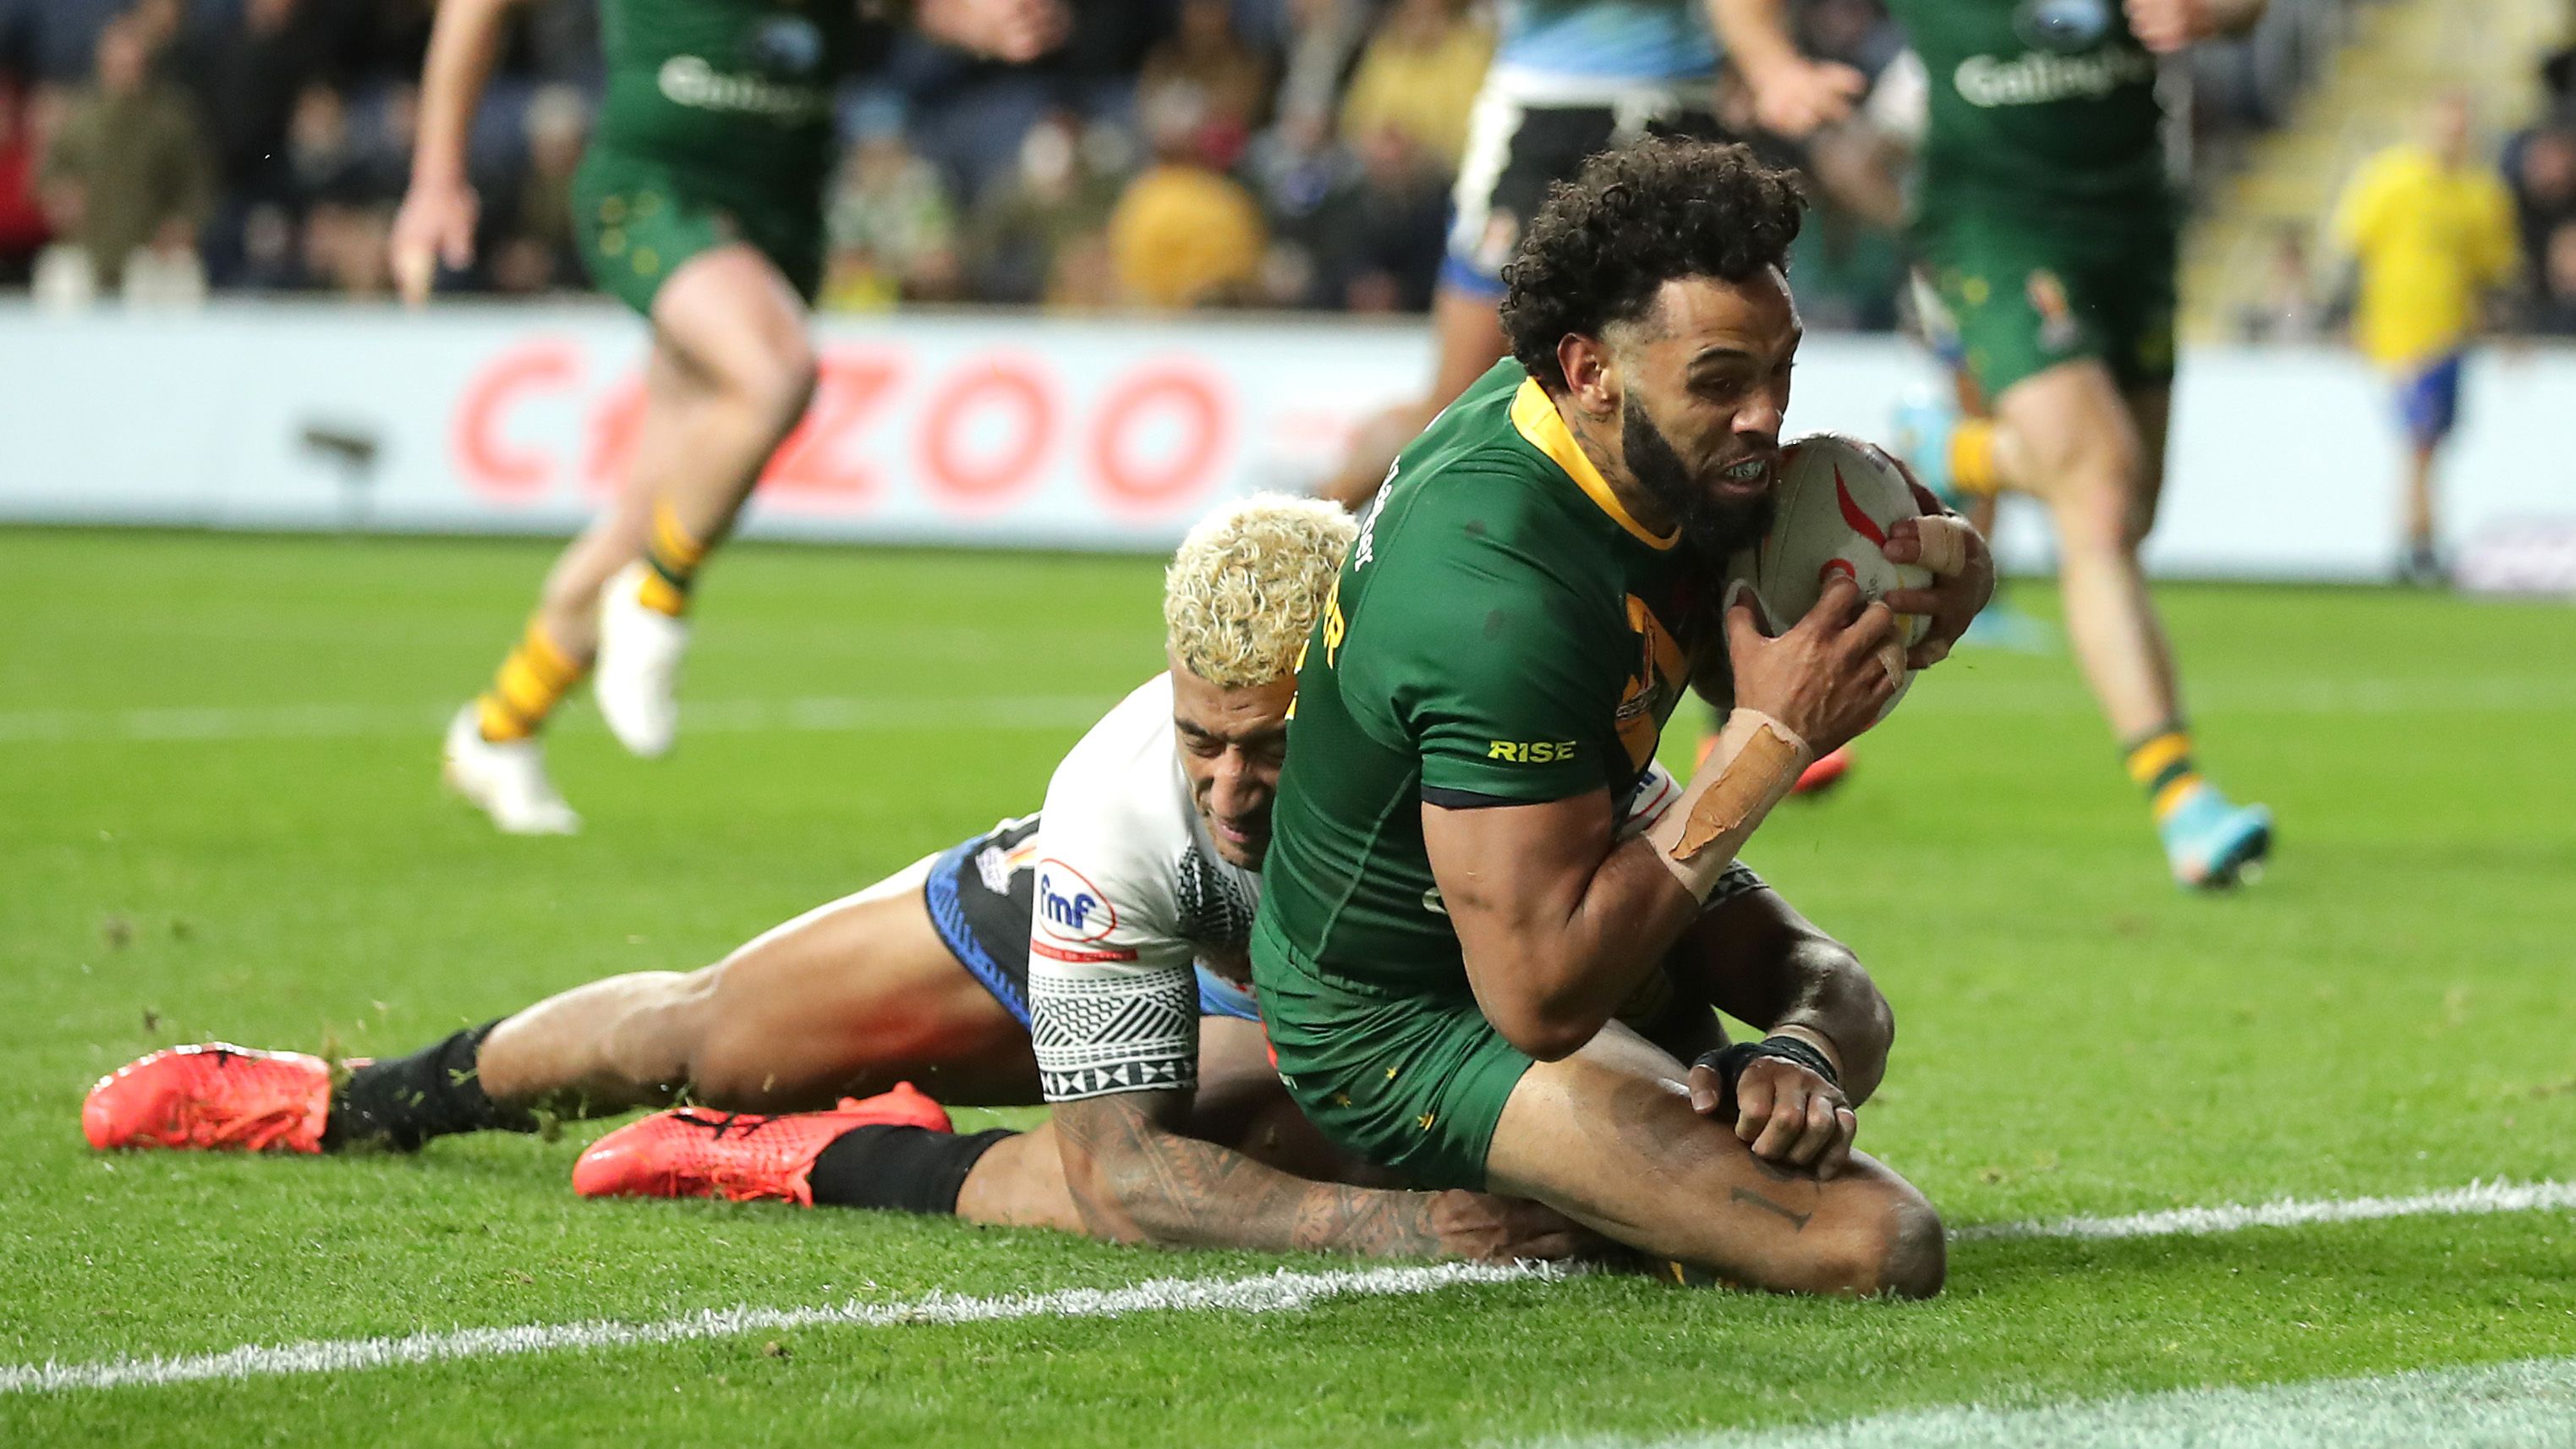 Australia&#x27;s Josh Addo-Carr scores his side&#x27;s seventh try of the game during the Rugby League World Cup group B match at Headingley Stadium, Leeds. Picture date: Saturday October 15, 2022. (Photo by Richard Sellers/PA Images via Getty Images)